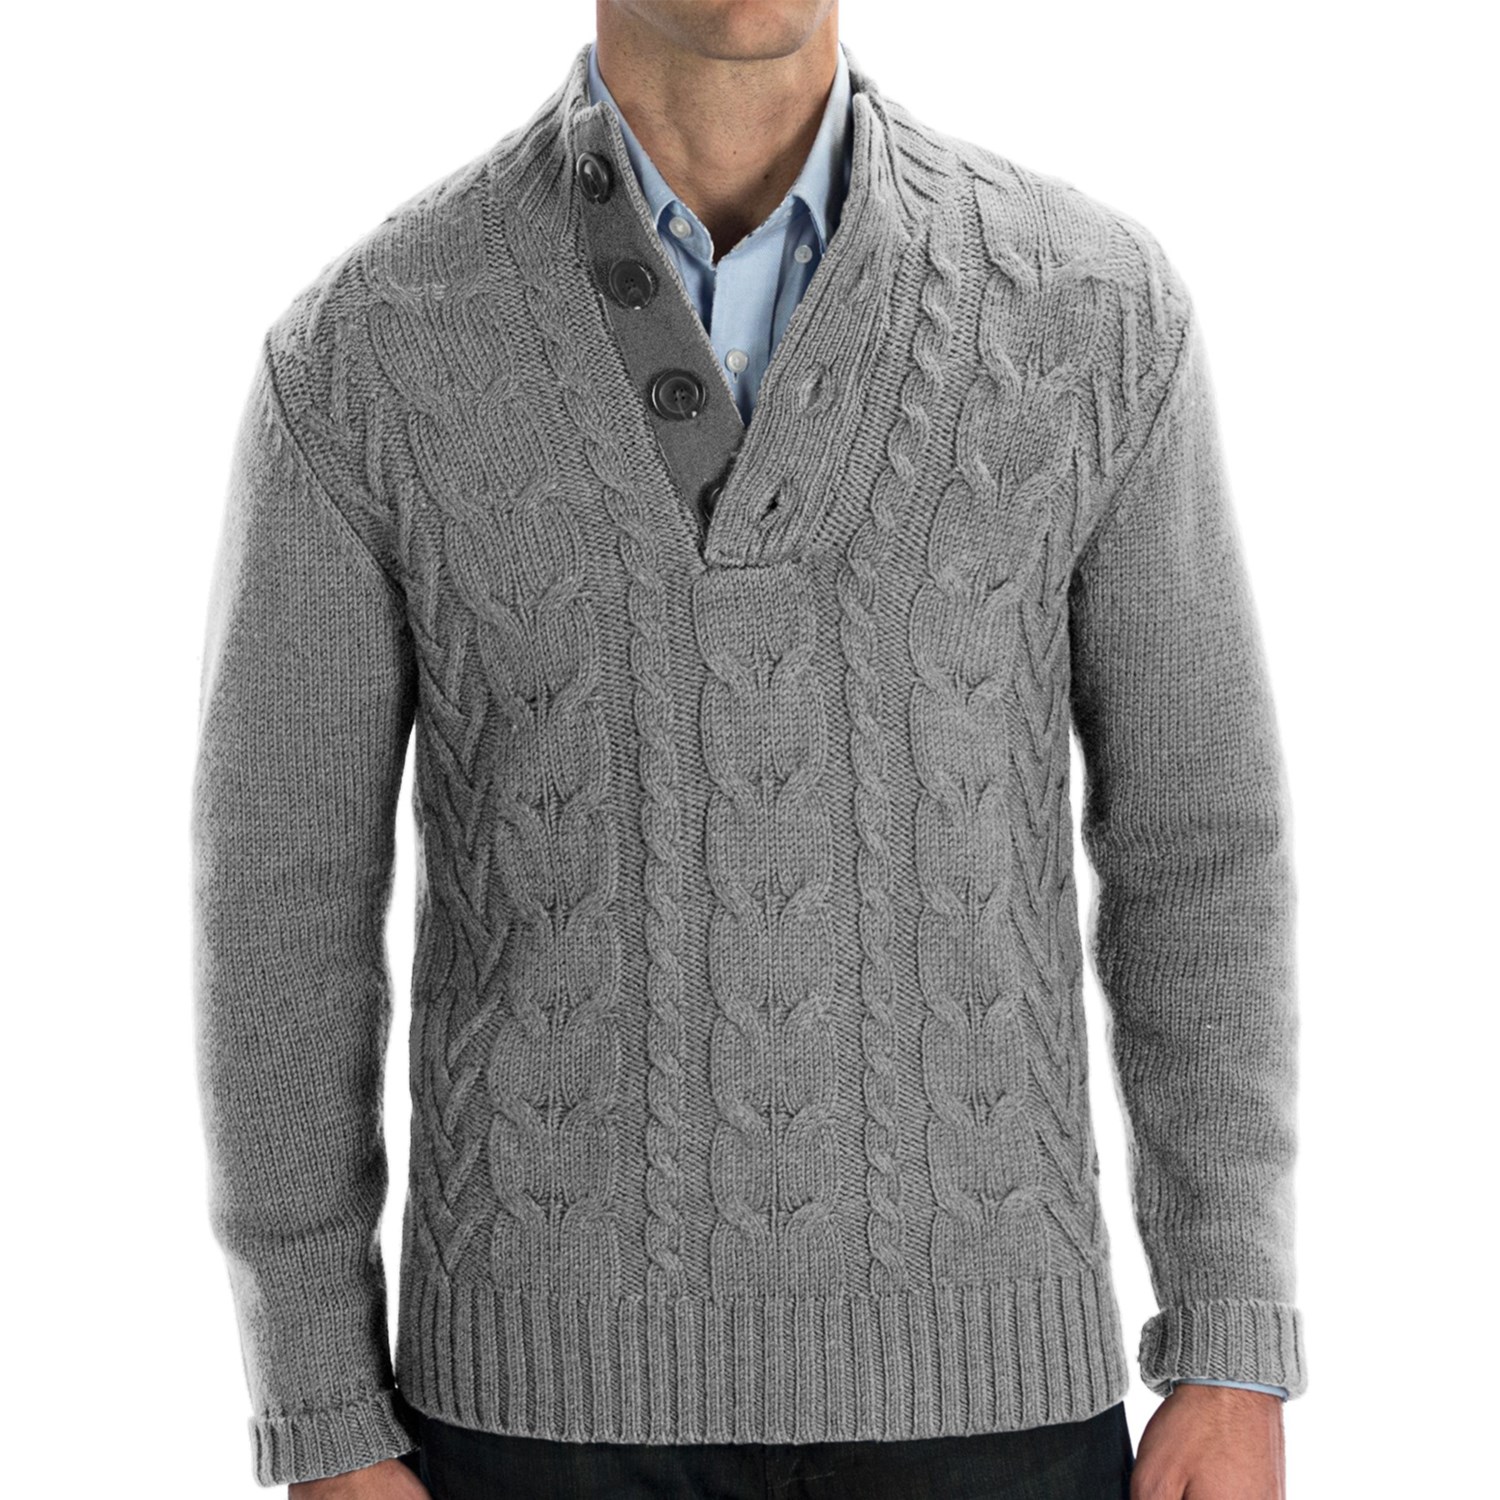 Cullen Wool Cable-Knit Sweater (For Men) - Save 35%